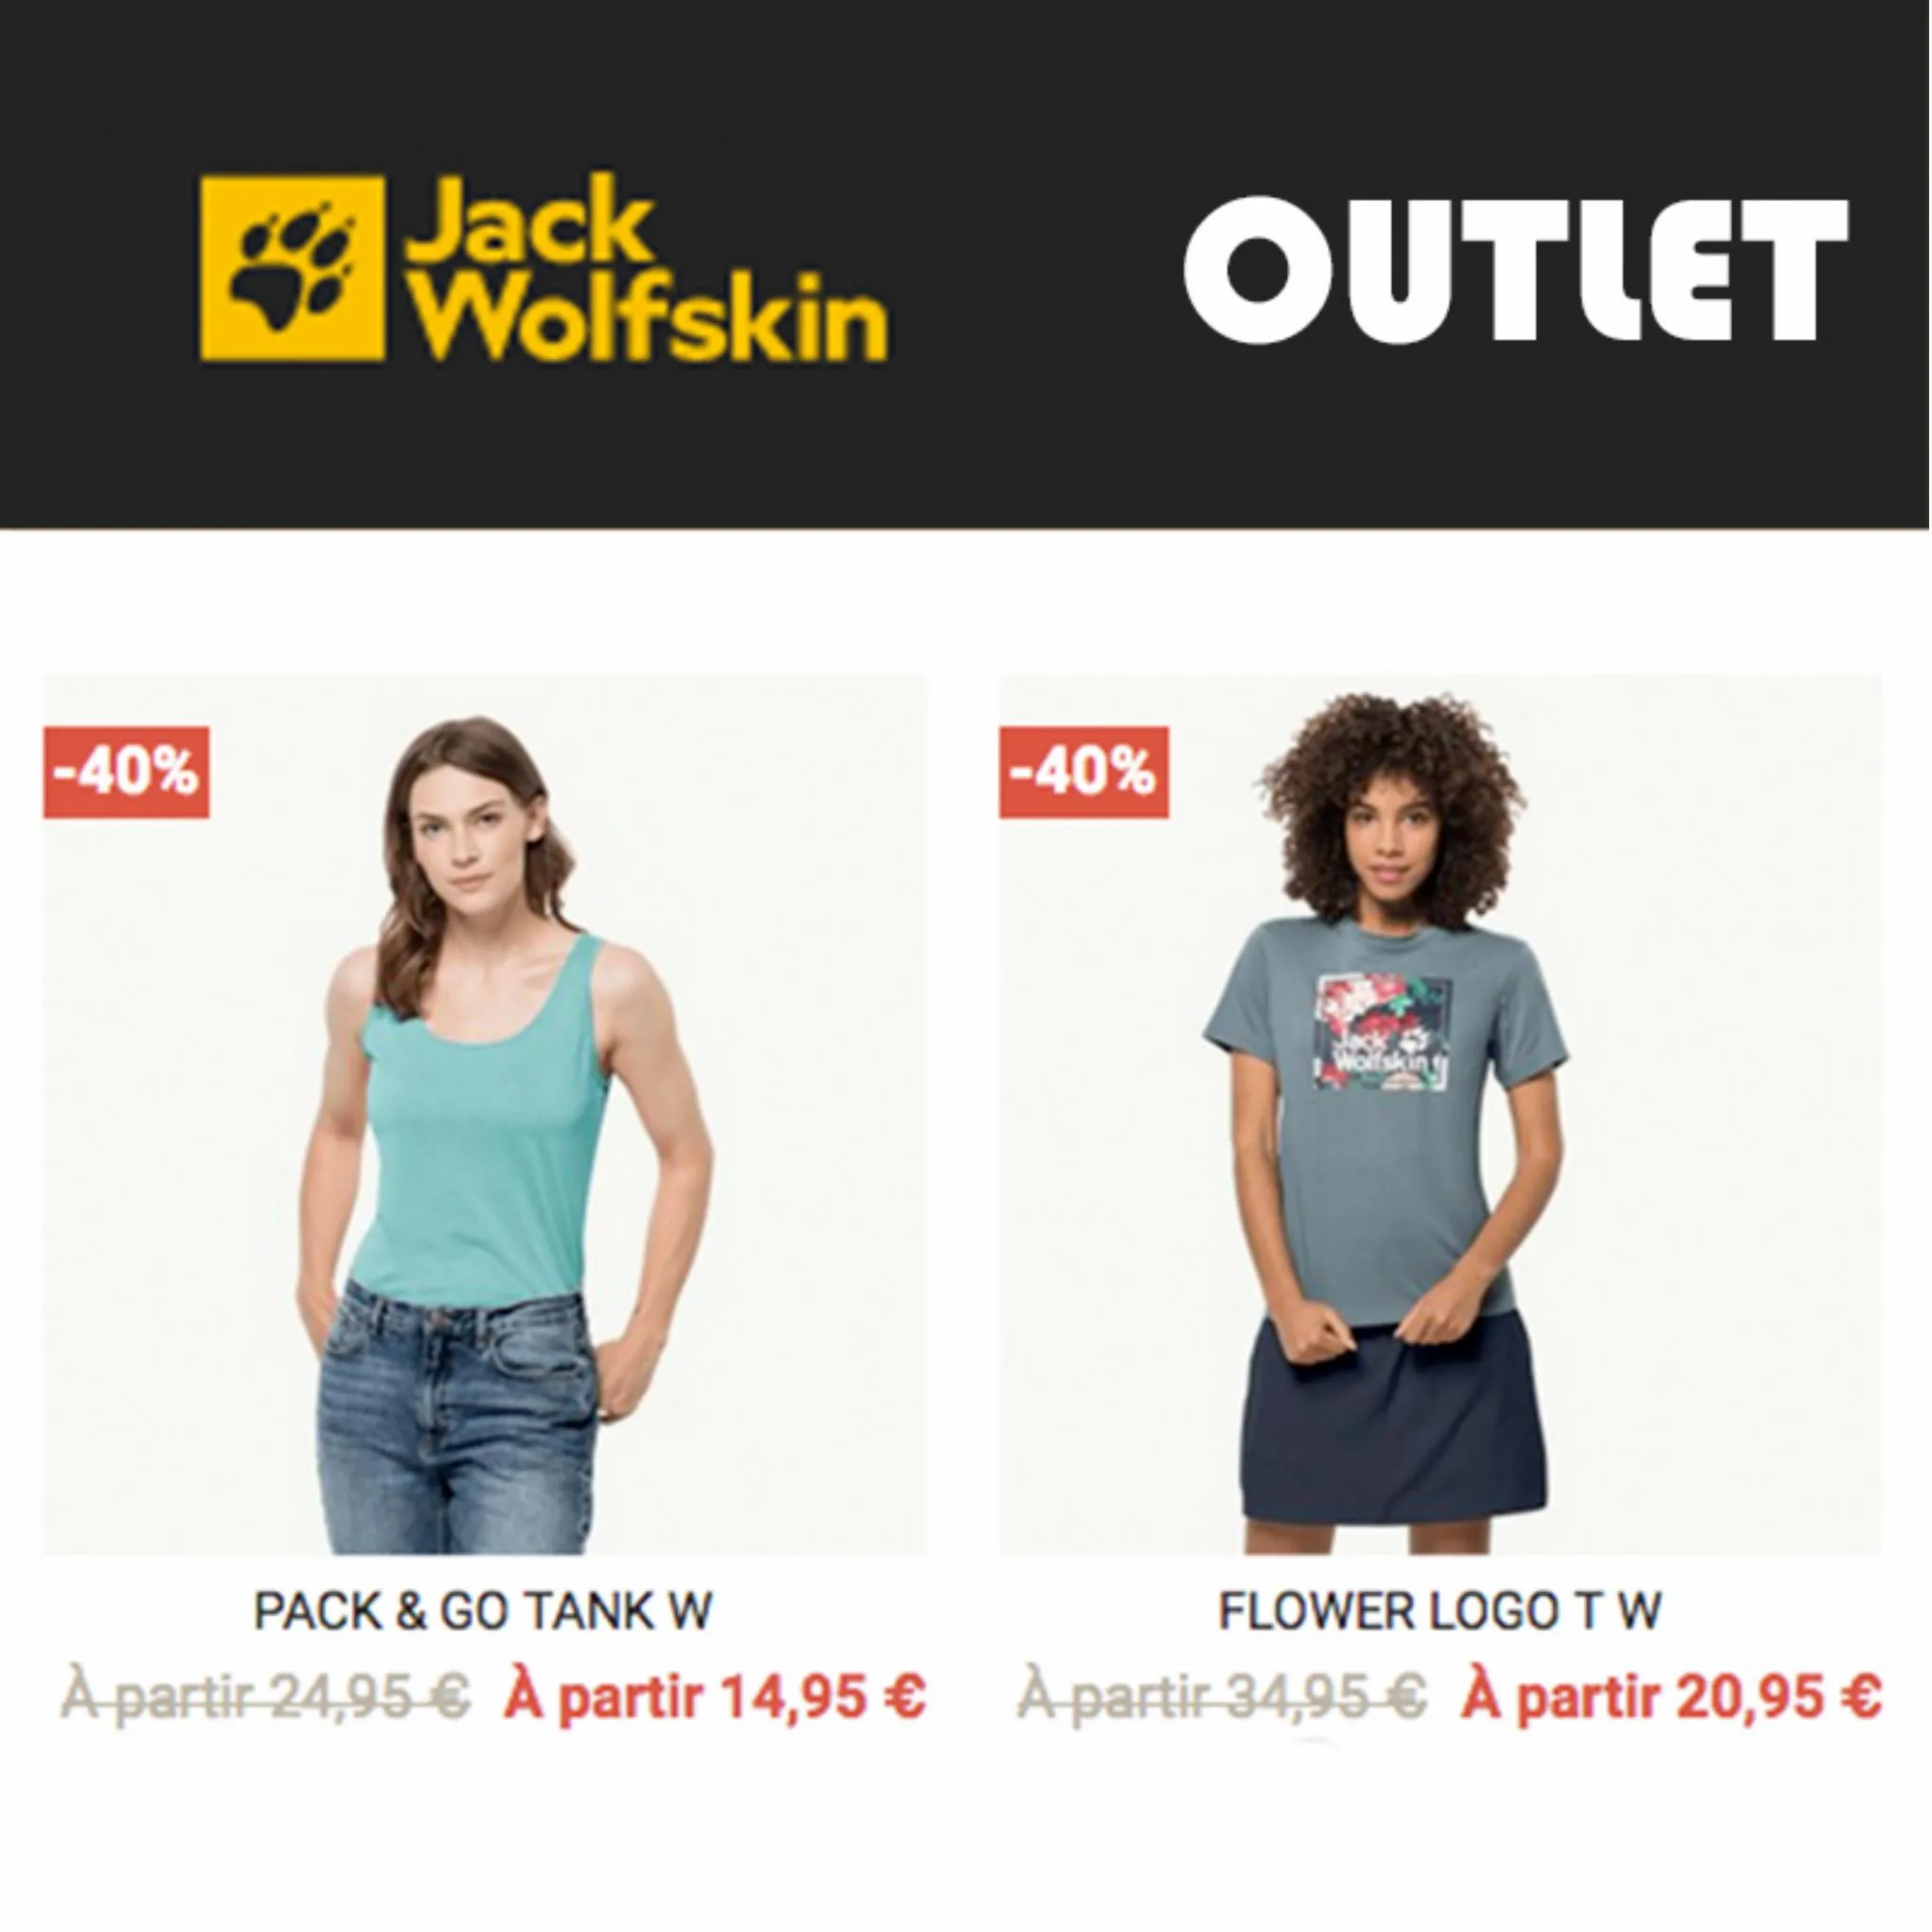 Catalogue Outlet Jack Wolfskin, page 00002